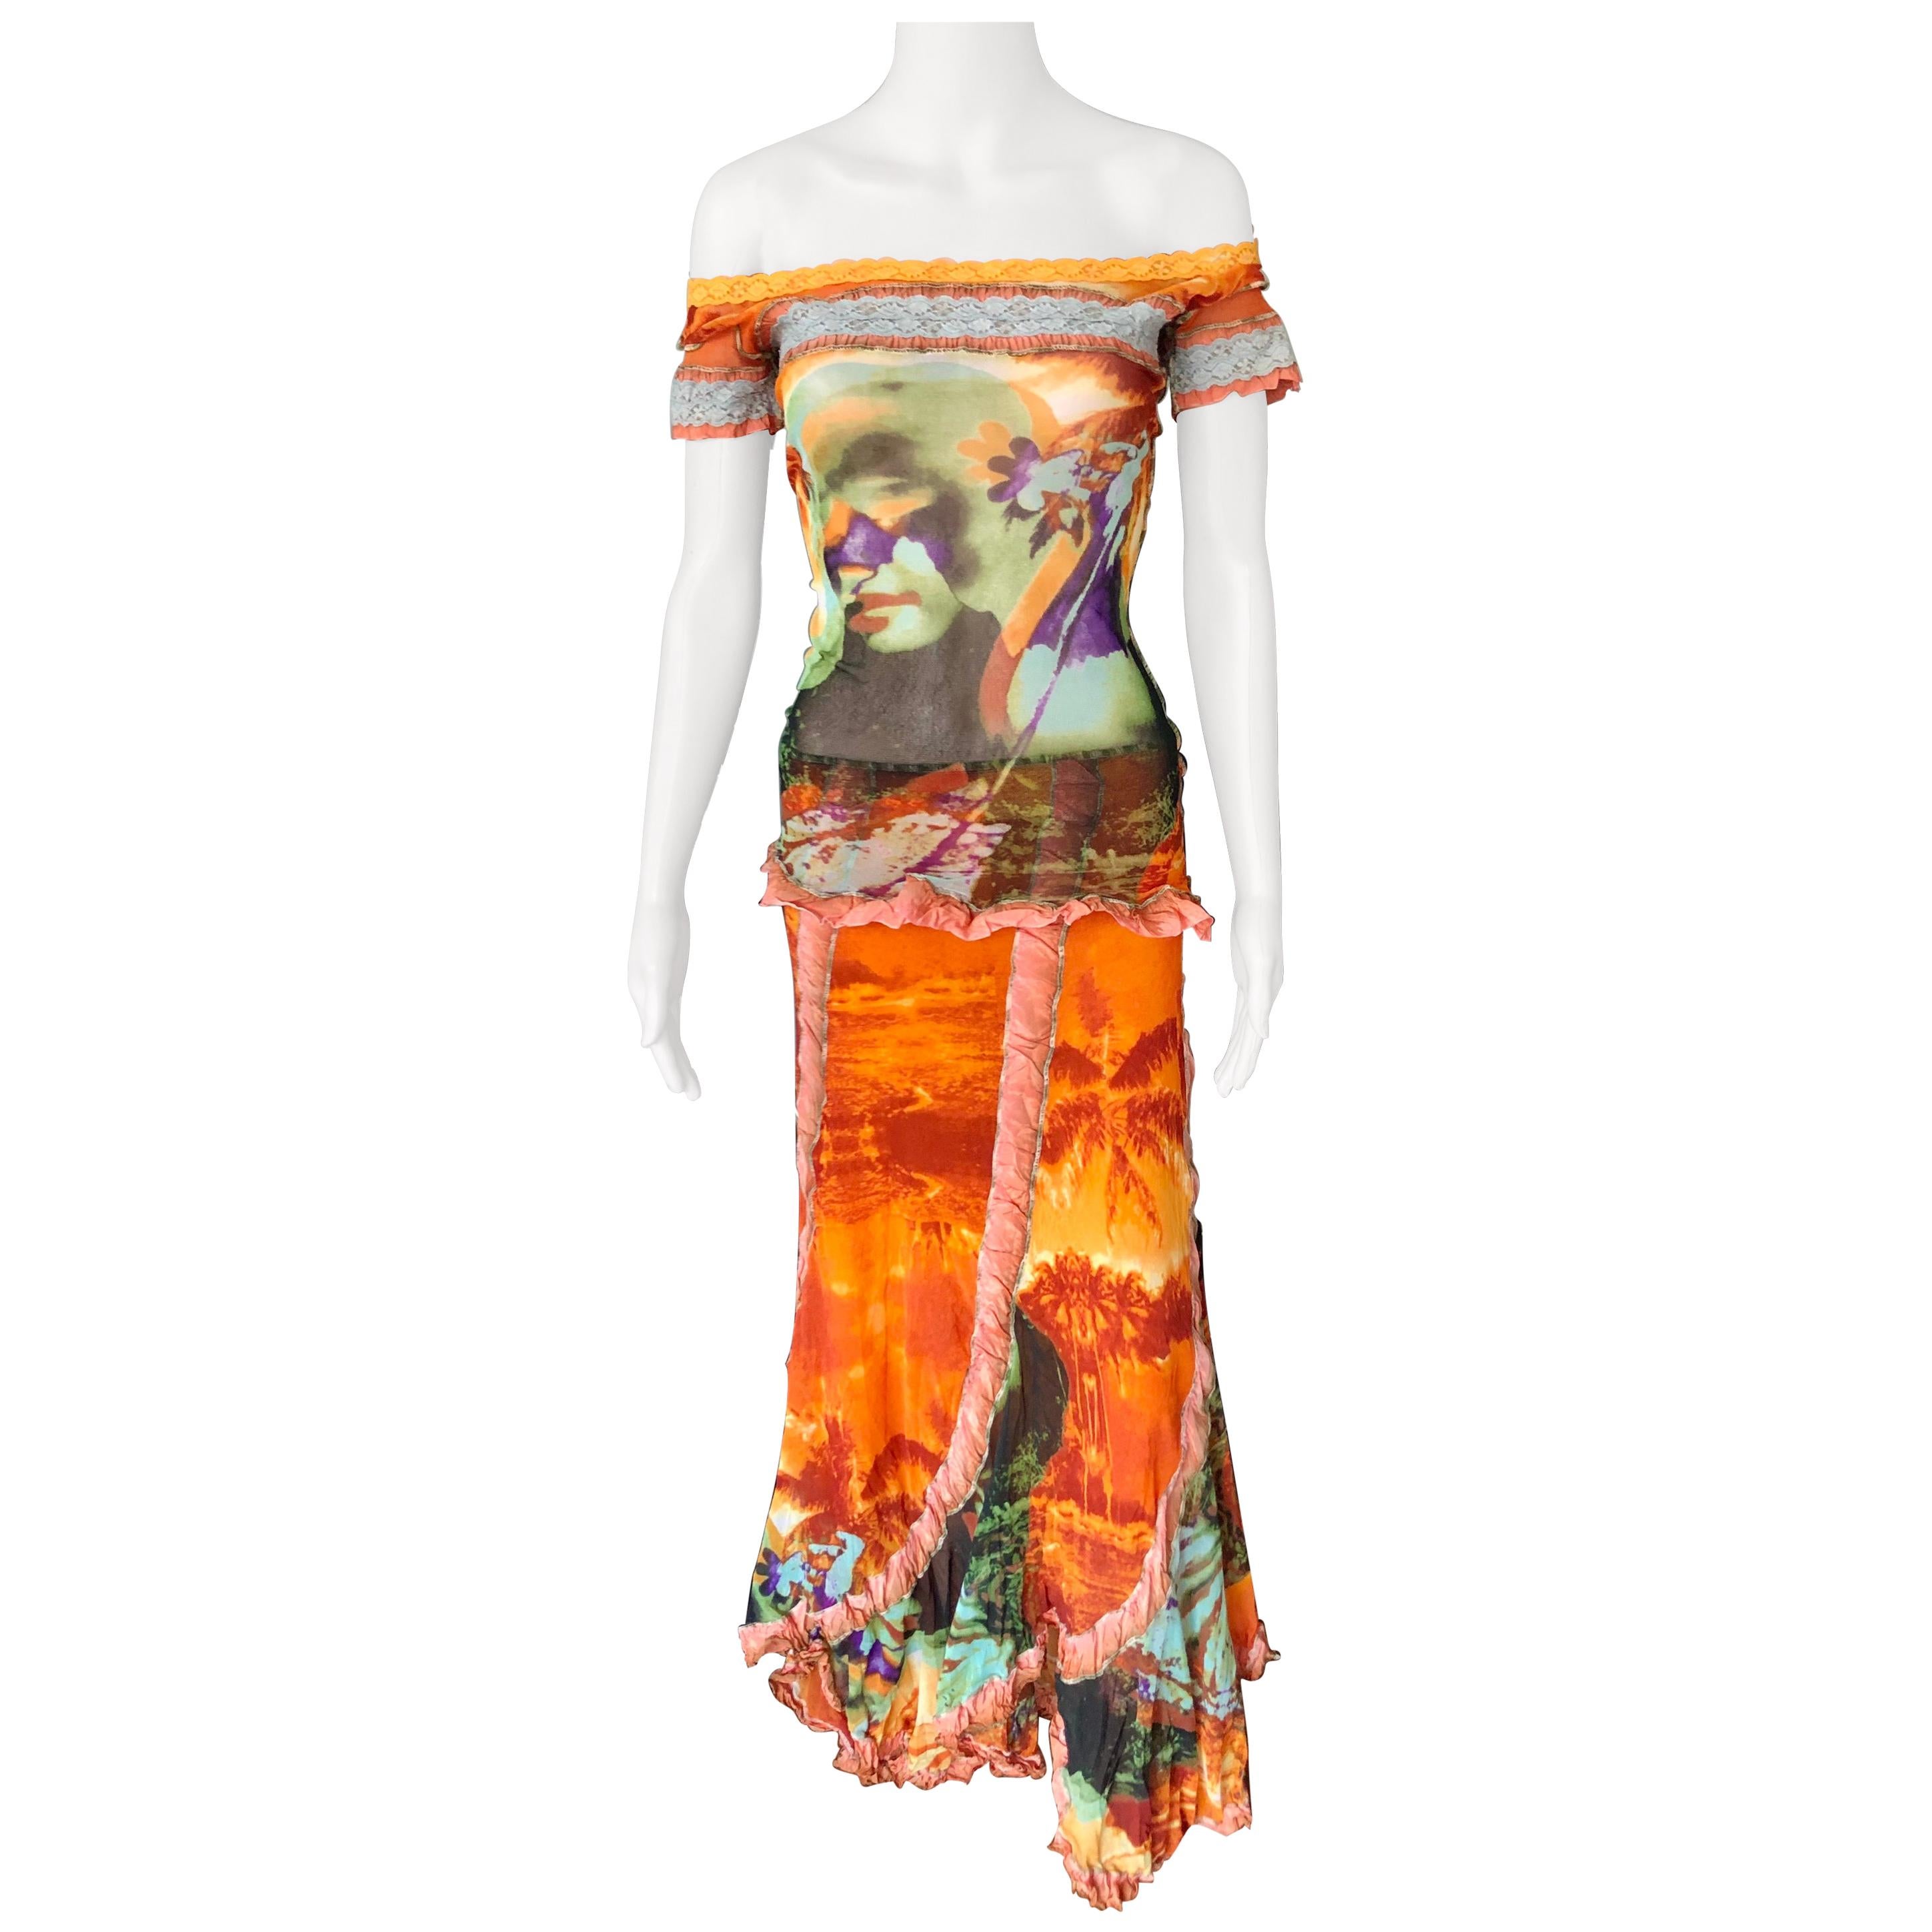 Jean Paul Gaultier S/S 2000 Abstract Psychedelic Top &Skirt Ensemble 2 Piece Set